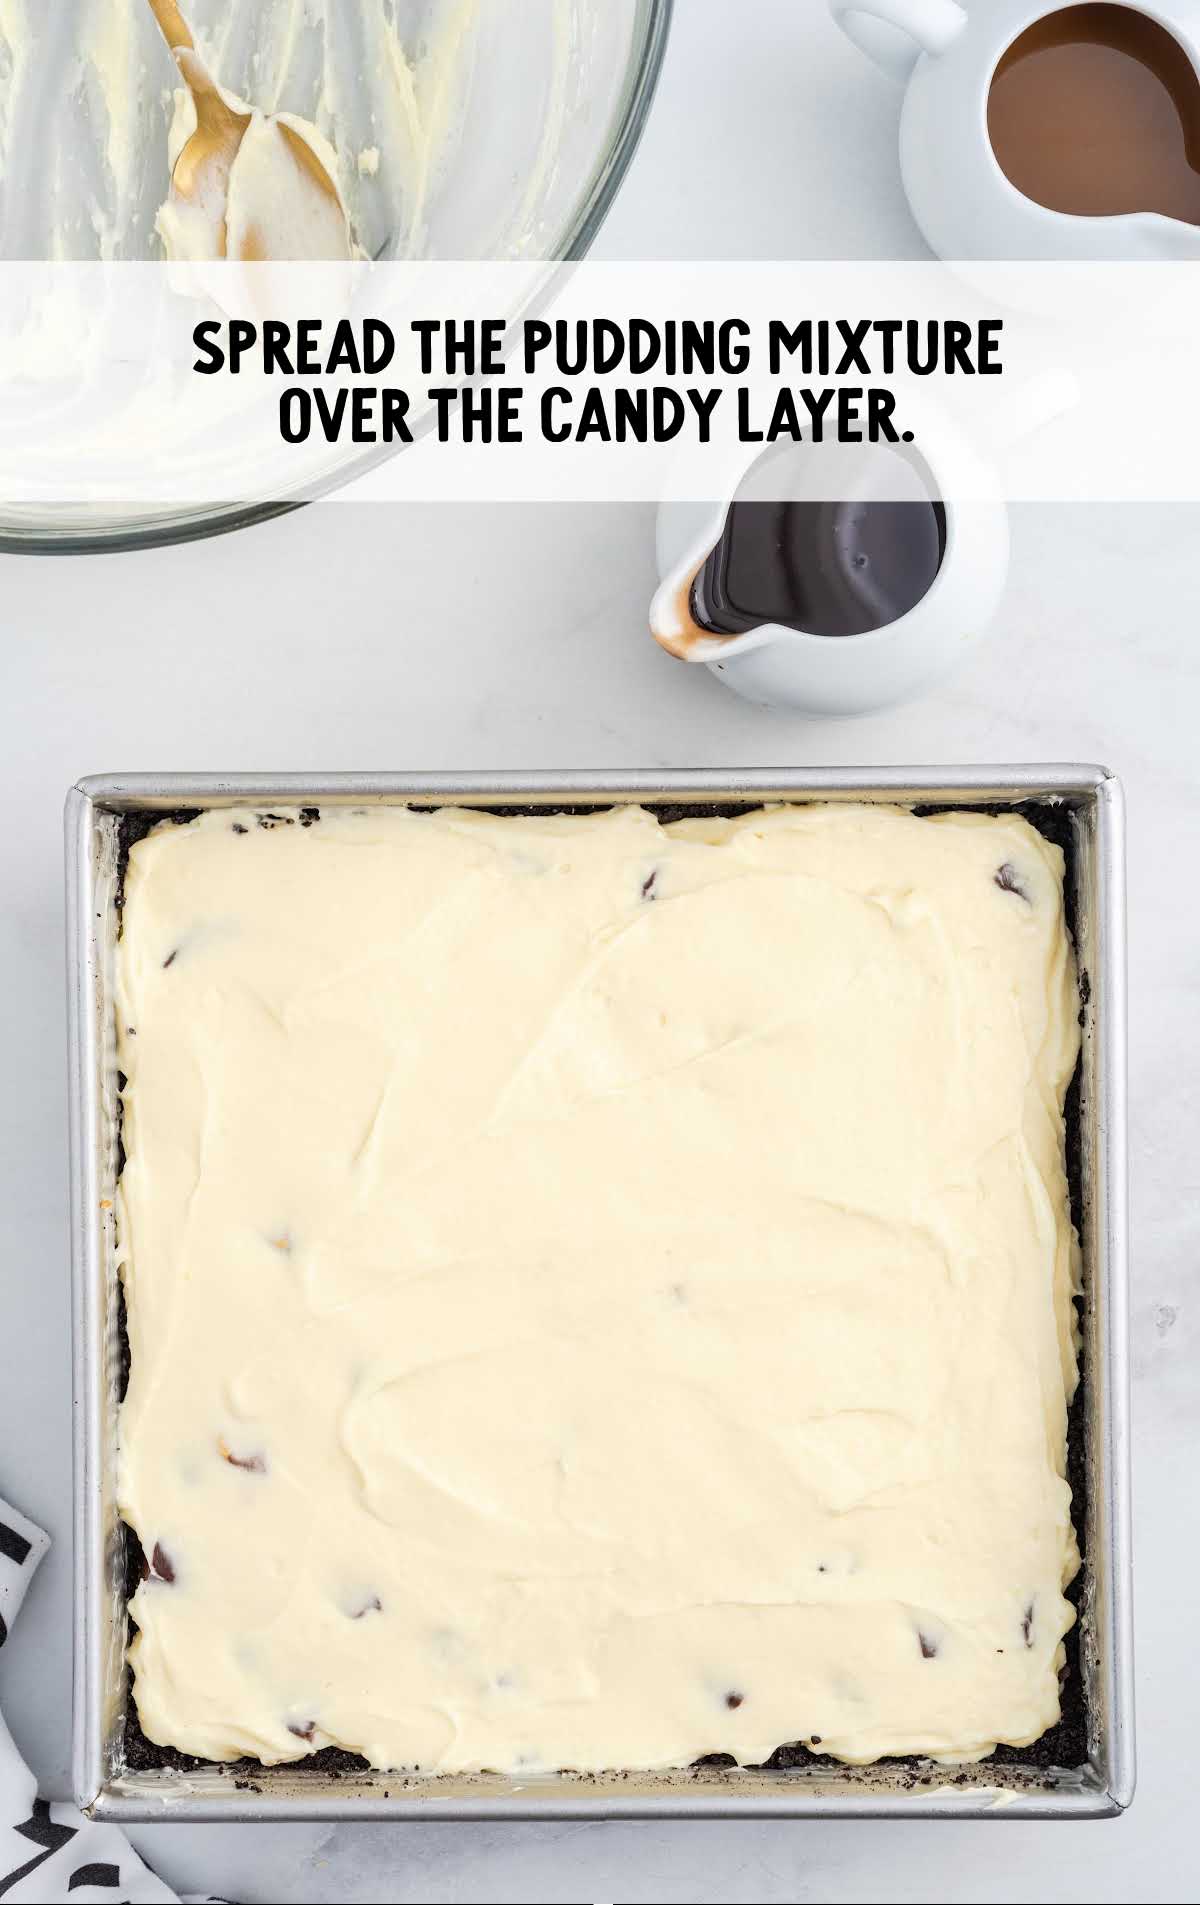 pudding mixture spread over the candy layer in a baking dish